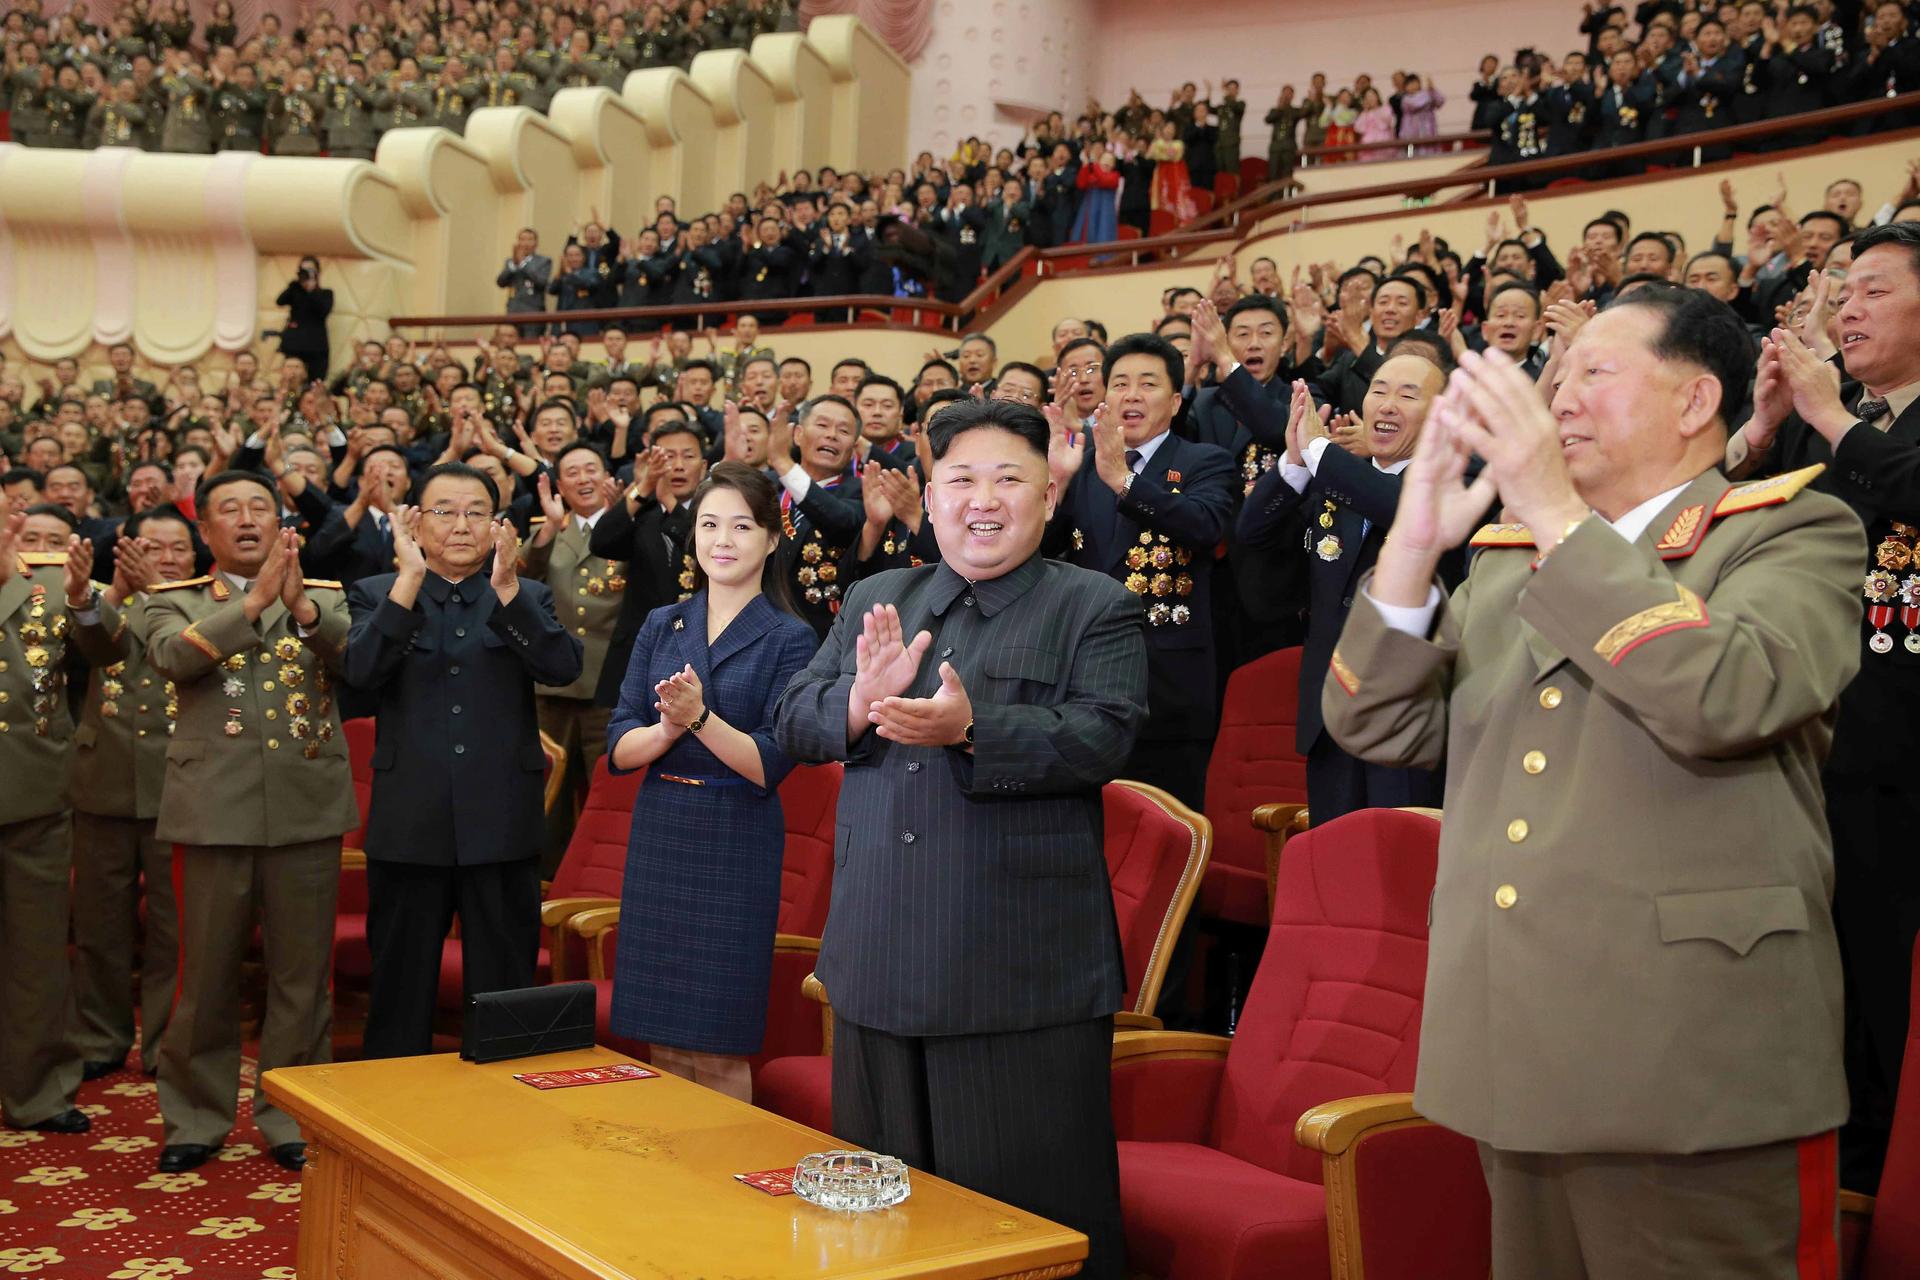 North Korean leader Kim Jong-un claps during a celebration for nuclear scientists and engineers who contributed to a hydrogen bomb test, in this undated photo released by North Korea's Korean Central News Agency (KCNA) in Pyongyang on September 10, 2017.